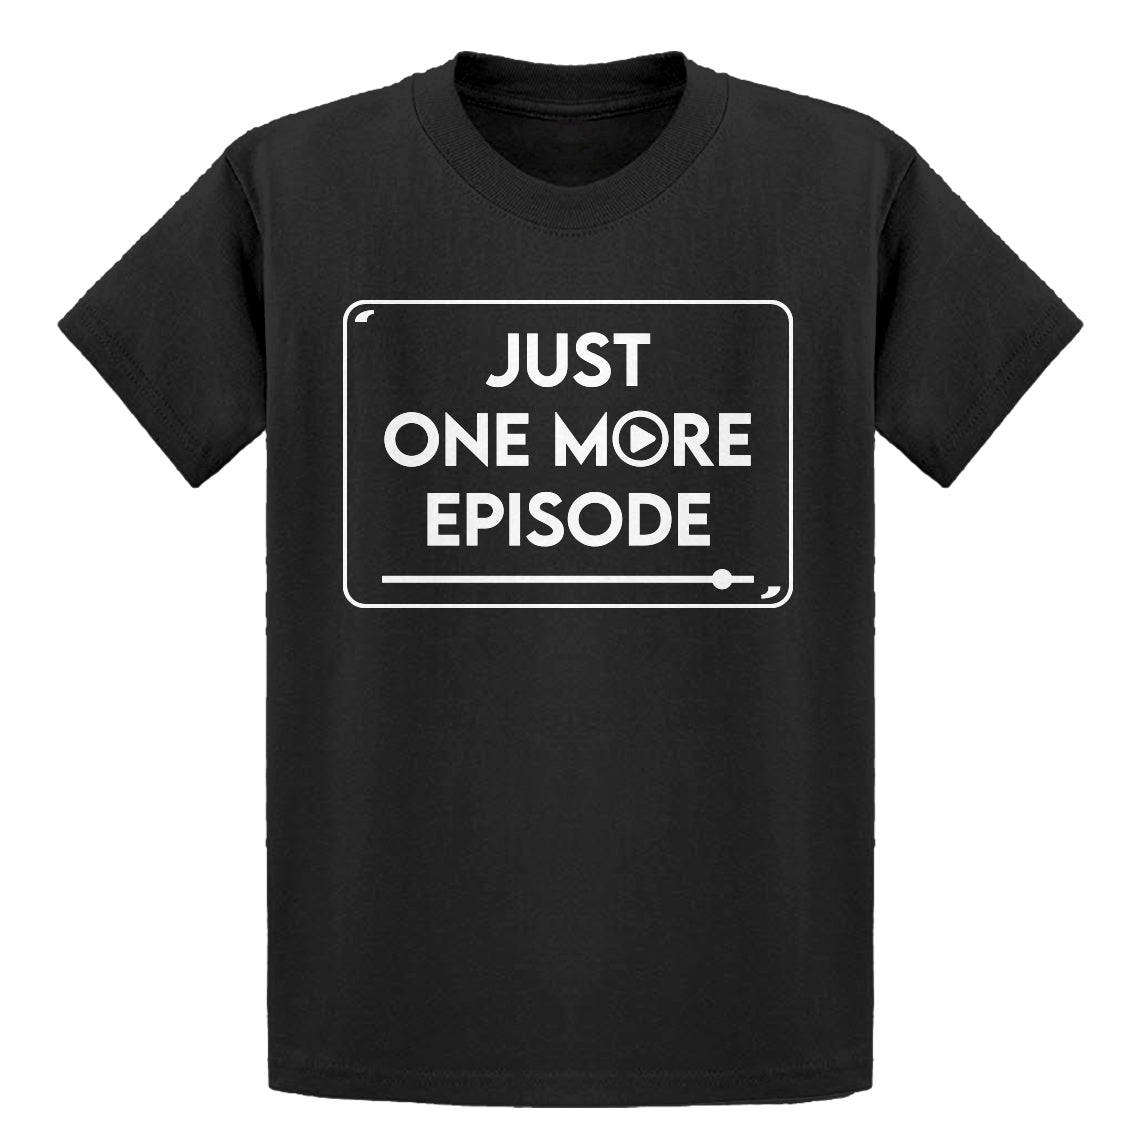 Youth Just one more episode. Kids T-shirt